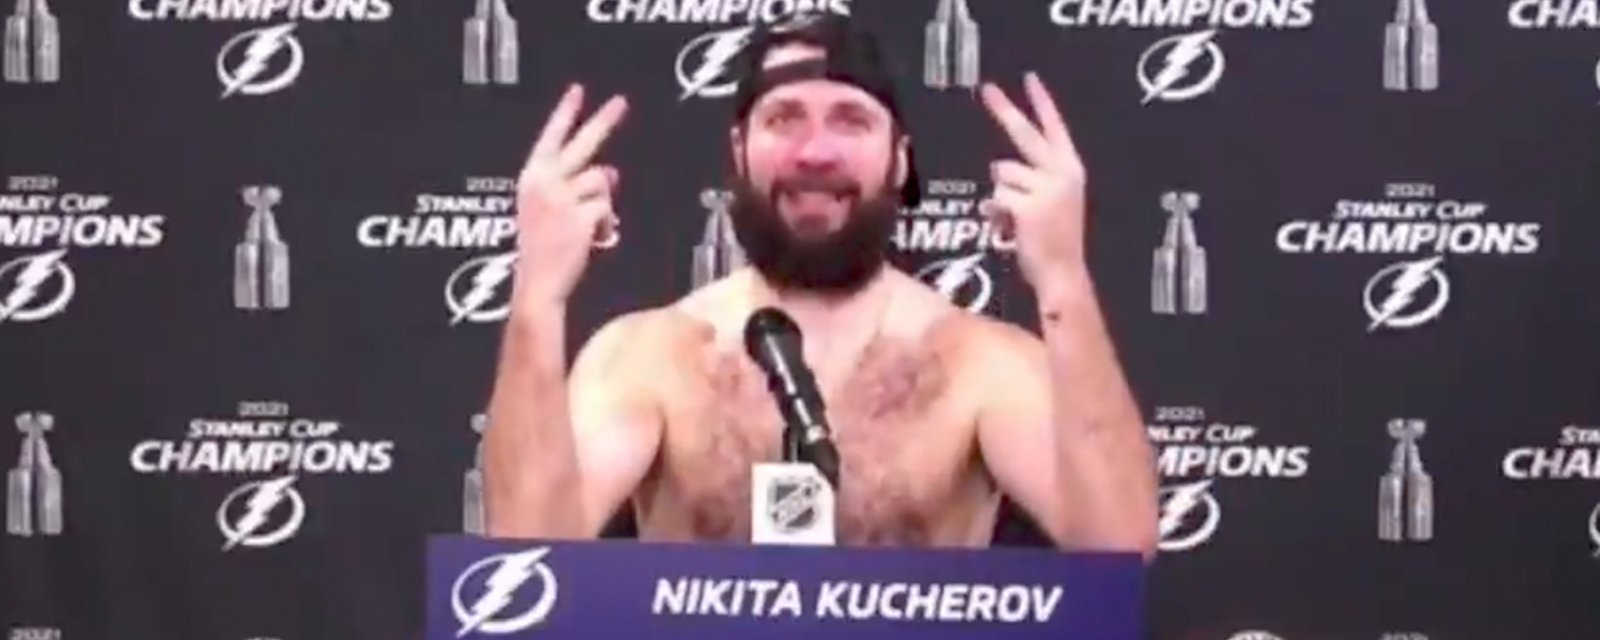 Nikita Kucherov absolutely brutalizes Canadiens fans with savage post-game comments  